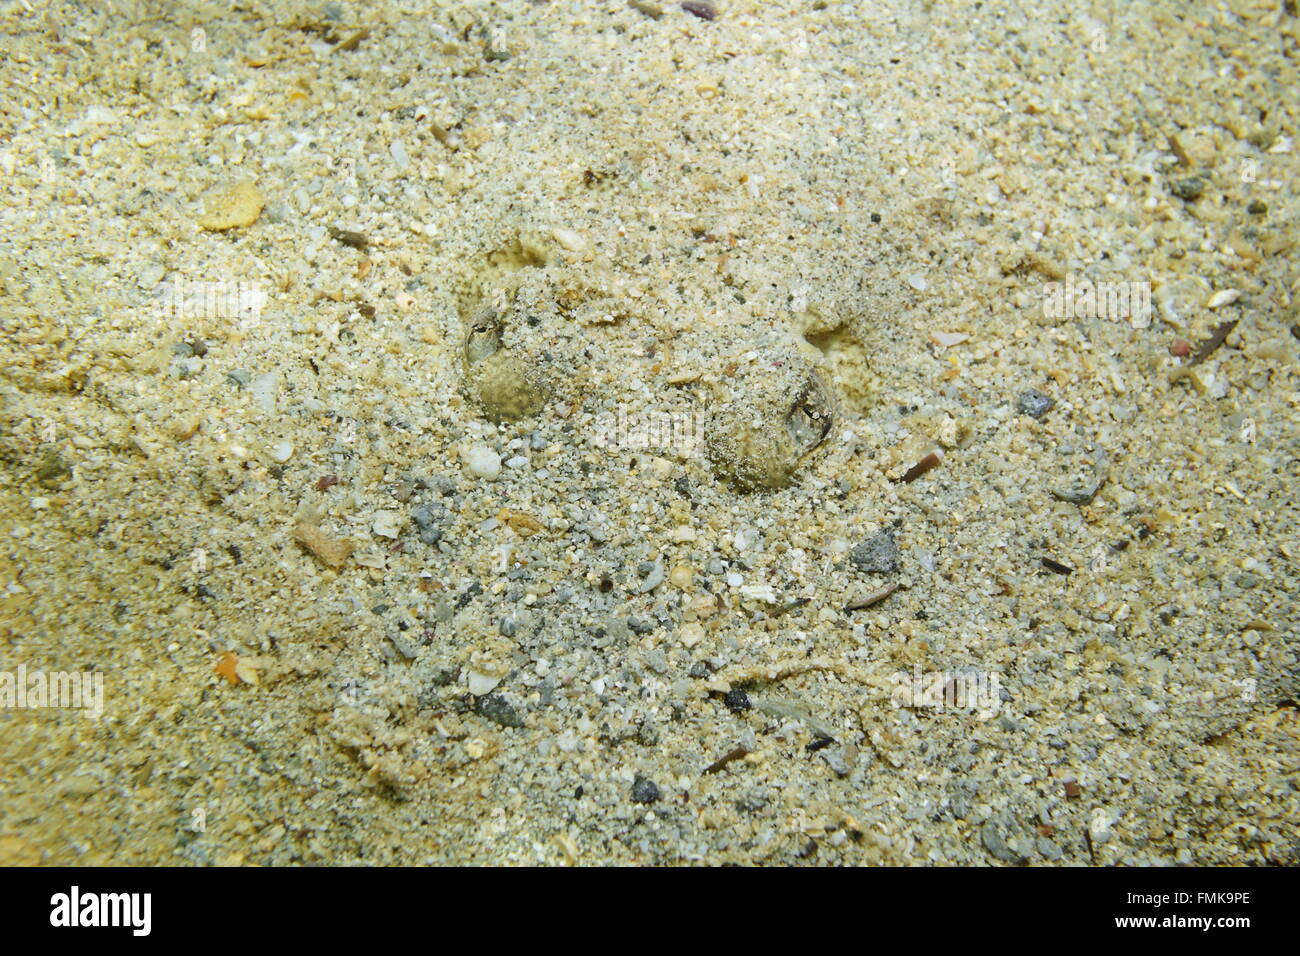 Eyes of Yellow stingray, Urobatis jamaicensis, with body hidden in the sand, Caribbean sea Stock Photo